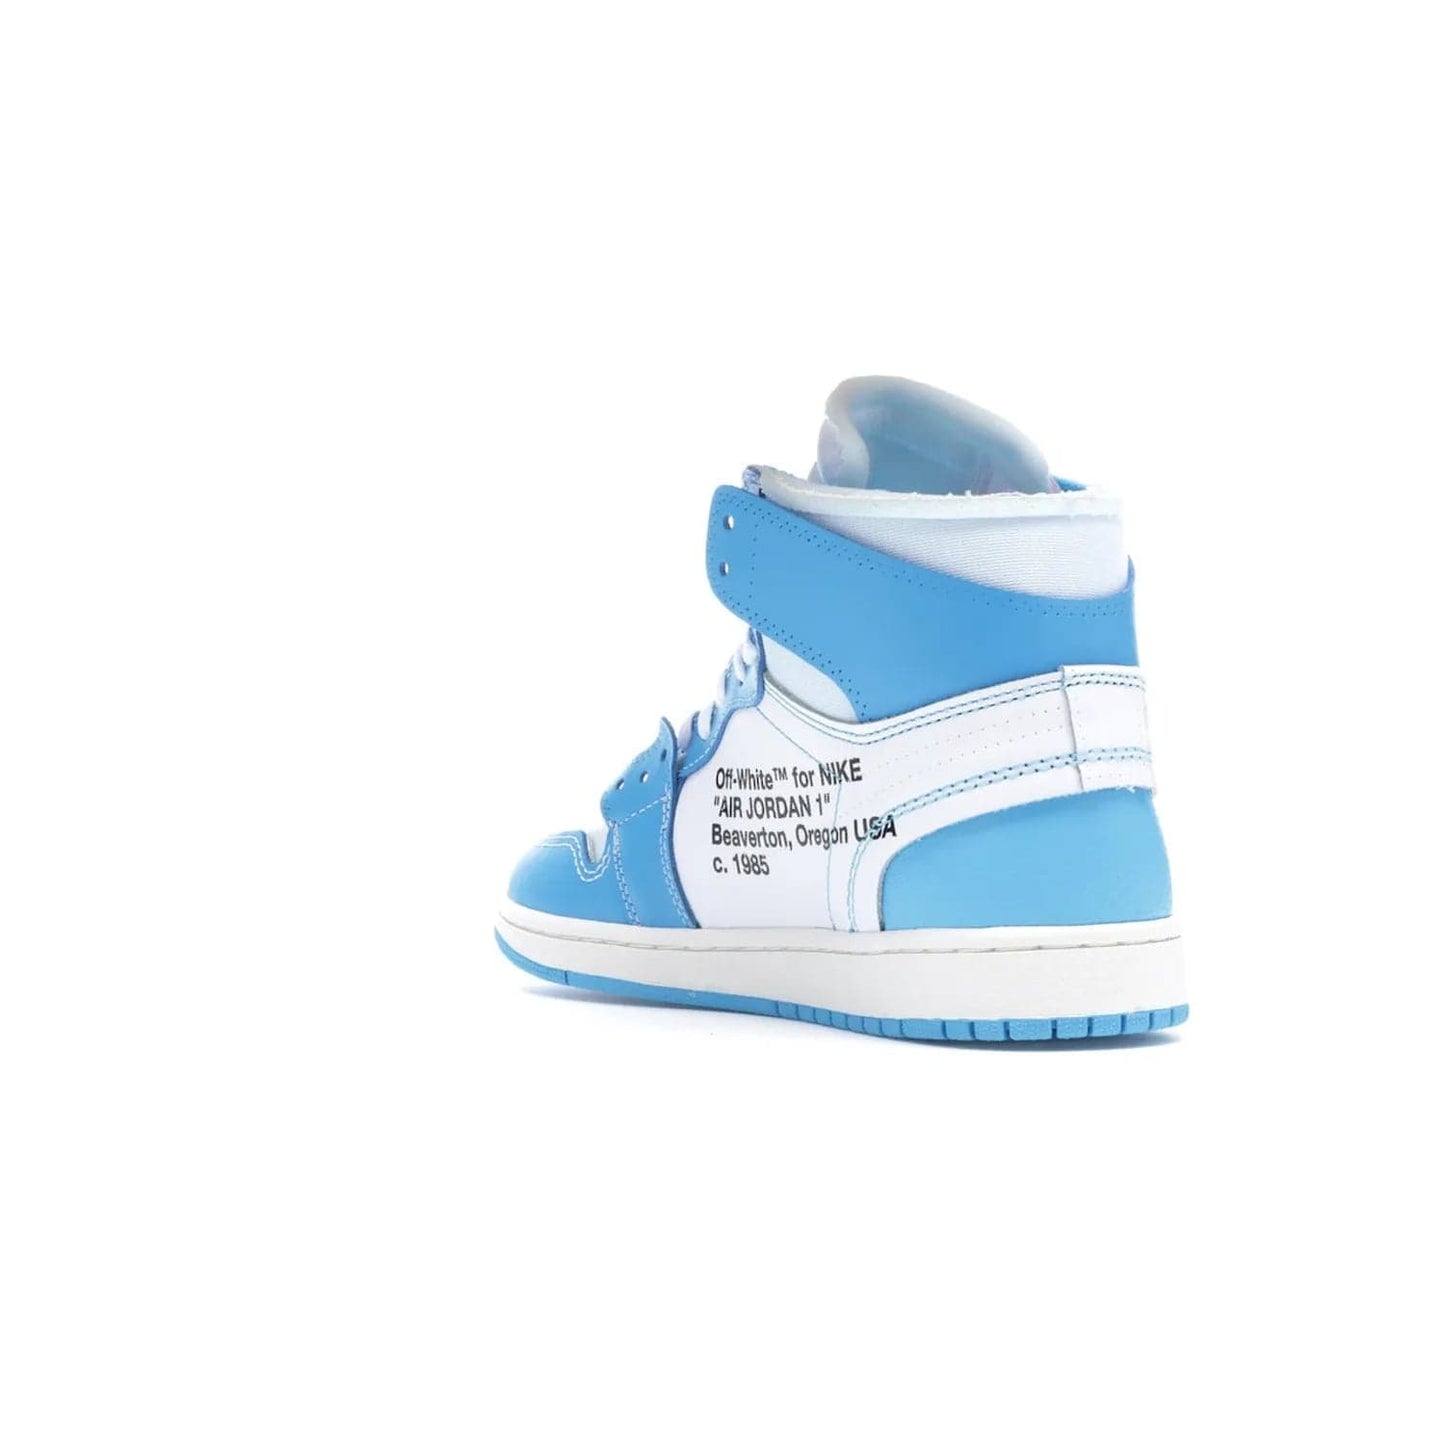 Jordan 1 Retro High Off-White University Blue - Image 25 - Only at www.BallersClubKickz.com - Classic Jordan 1 Retro High "Off-White UNC" sneakers meld style and comfort. Boasting deconstructed white and blue leather, Off-White detailing, and a white, dark powder blue and cone colorway, these sneakers are perfect for dressing up or down. Get the iconic Off-White Jordan 1's and upgrade your look.